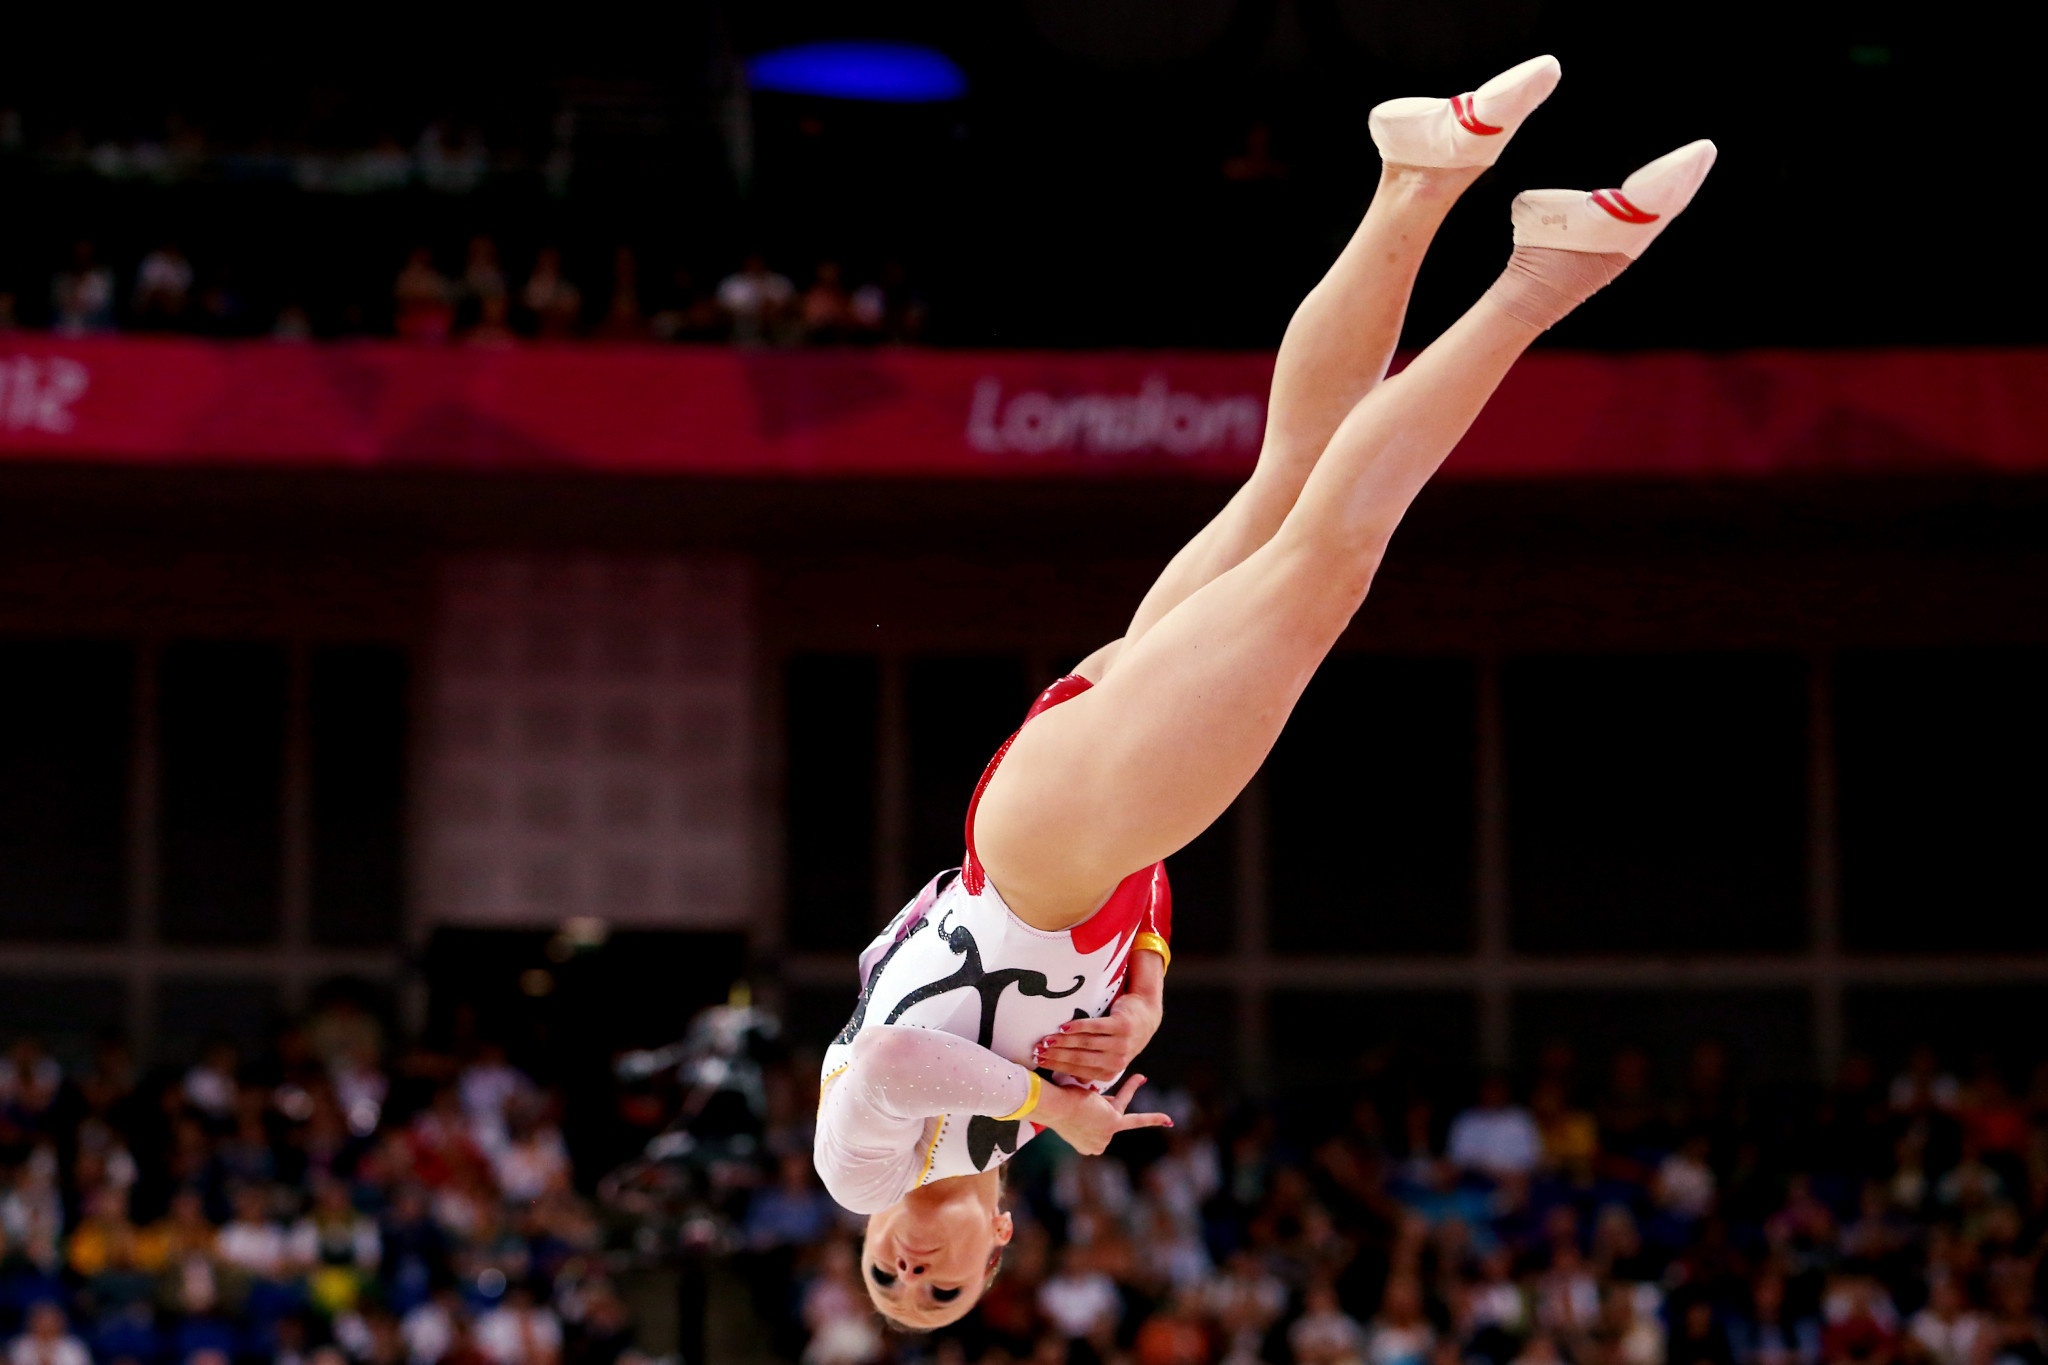 Marta Pihan-Kulesza will compete at the World Cup in Cottbus ©Getty Images